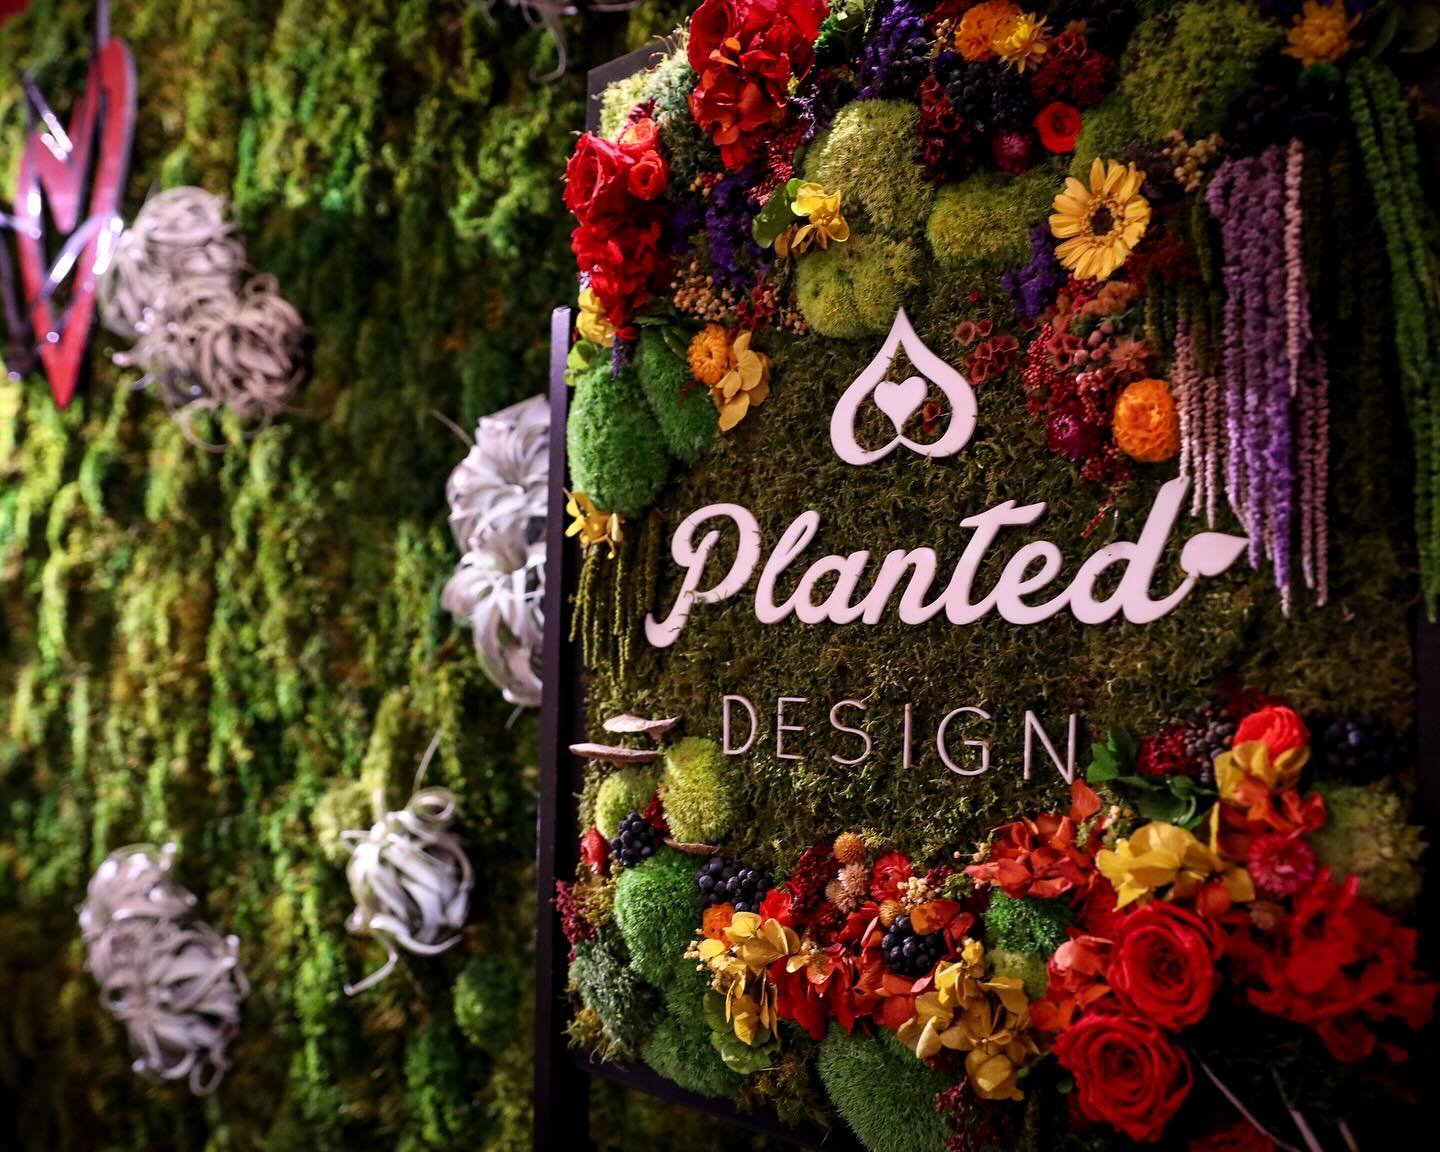 Capturing memories in style at #EntireProductions #ModernArtAttack 🌸🌱📸 Planted Design&rsquo;s (@planted.design) living wall was the ultimate selfie spot! ✨ 

Whether it&rsquo;s a moss wall or potted live plants, they have the perfect focal point t